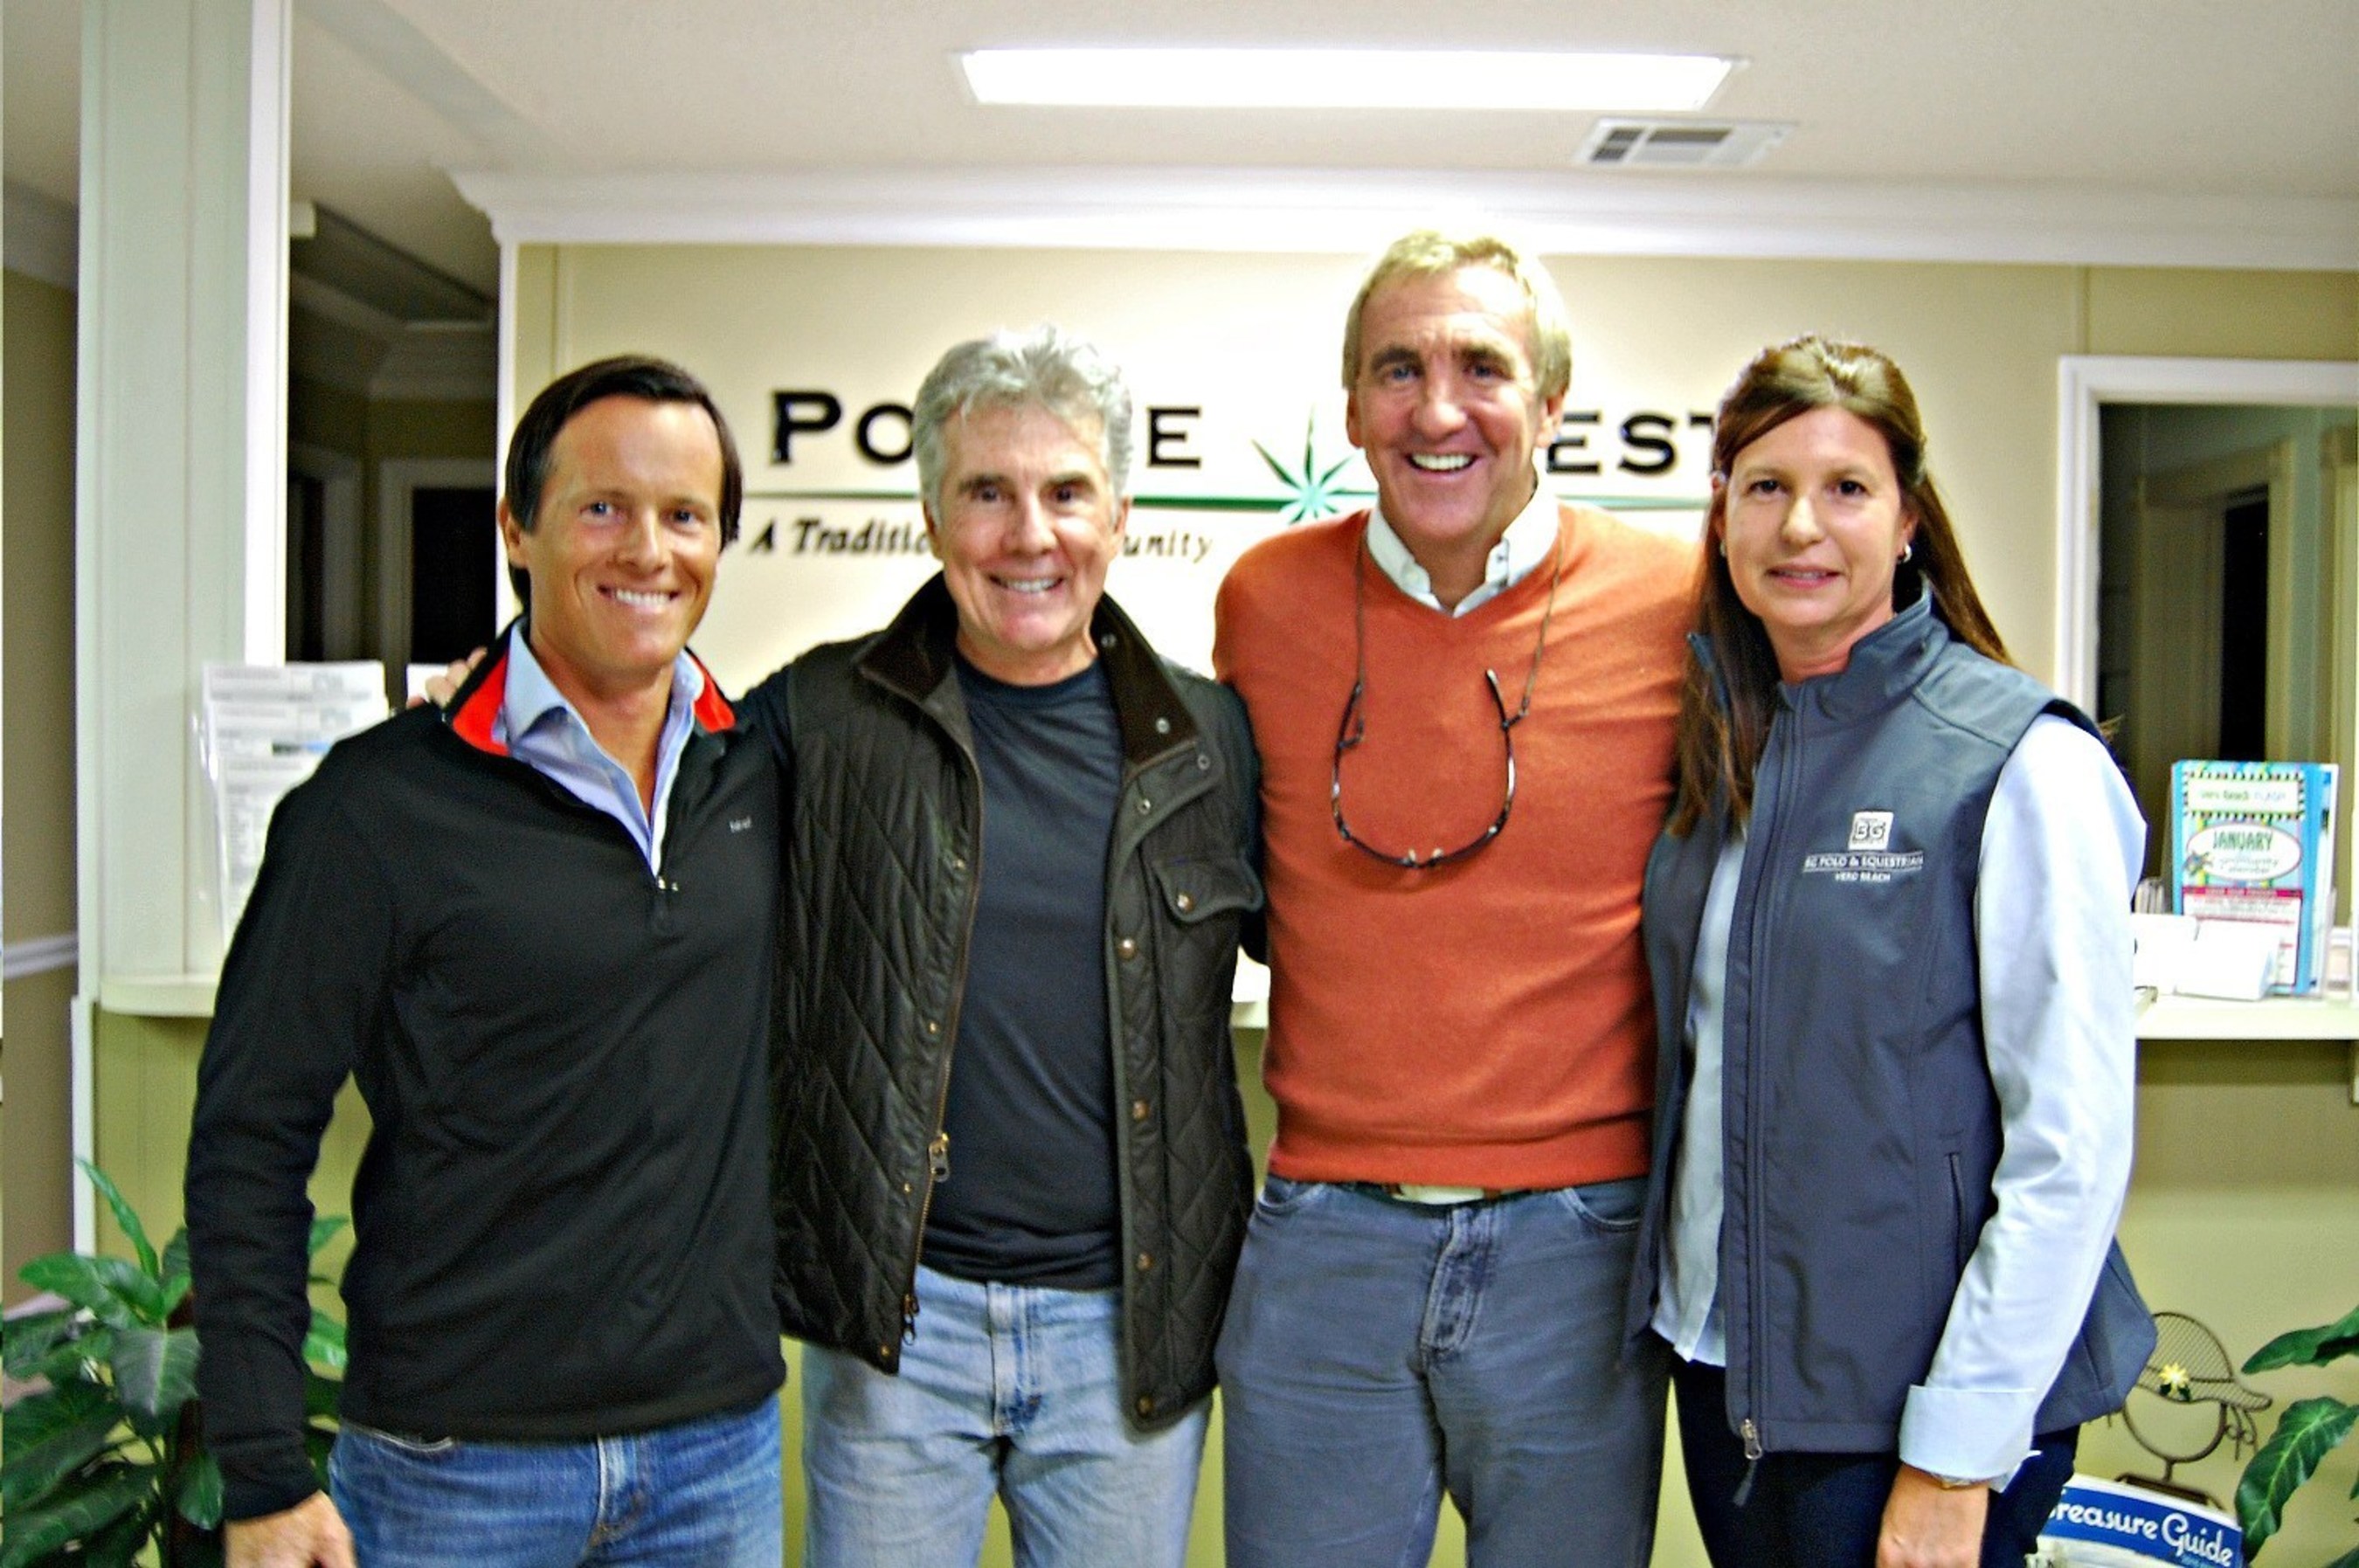 (Pictured, left to right) Max Secunda, BG Vero Beach Polo Club Director and Manager; John Walsh, creator of America's Most Wanted and owner of Team Shamrock Polo as well as founding member of BG Vero Beach Polo Club; Bobby Genovese, Chairman BG Capital Group and BG Signature; and Patta Conboy, Equestrian Director, BG Polo & Equestrian Vero Beach.